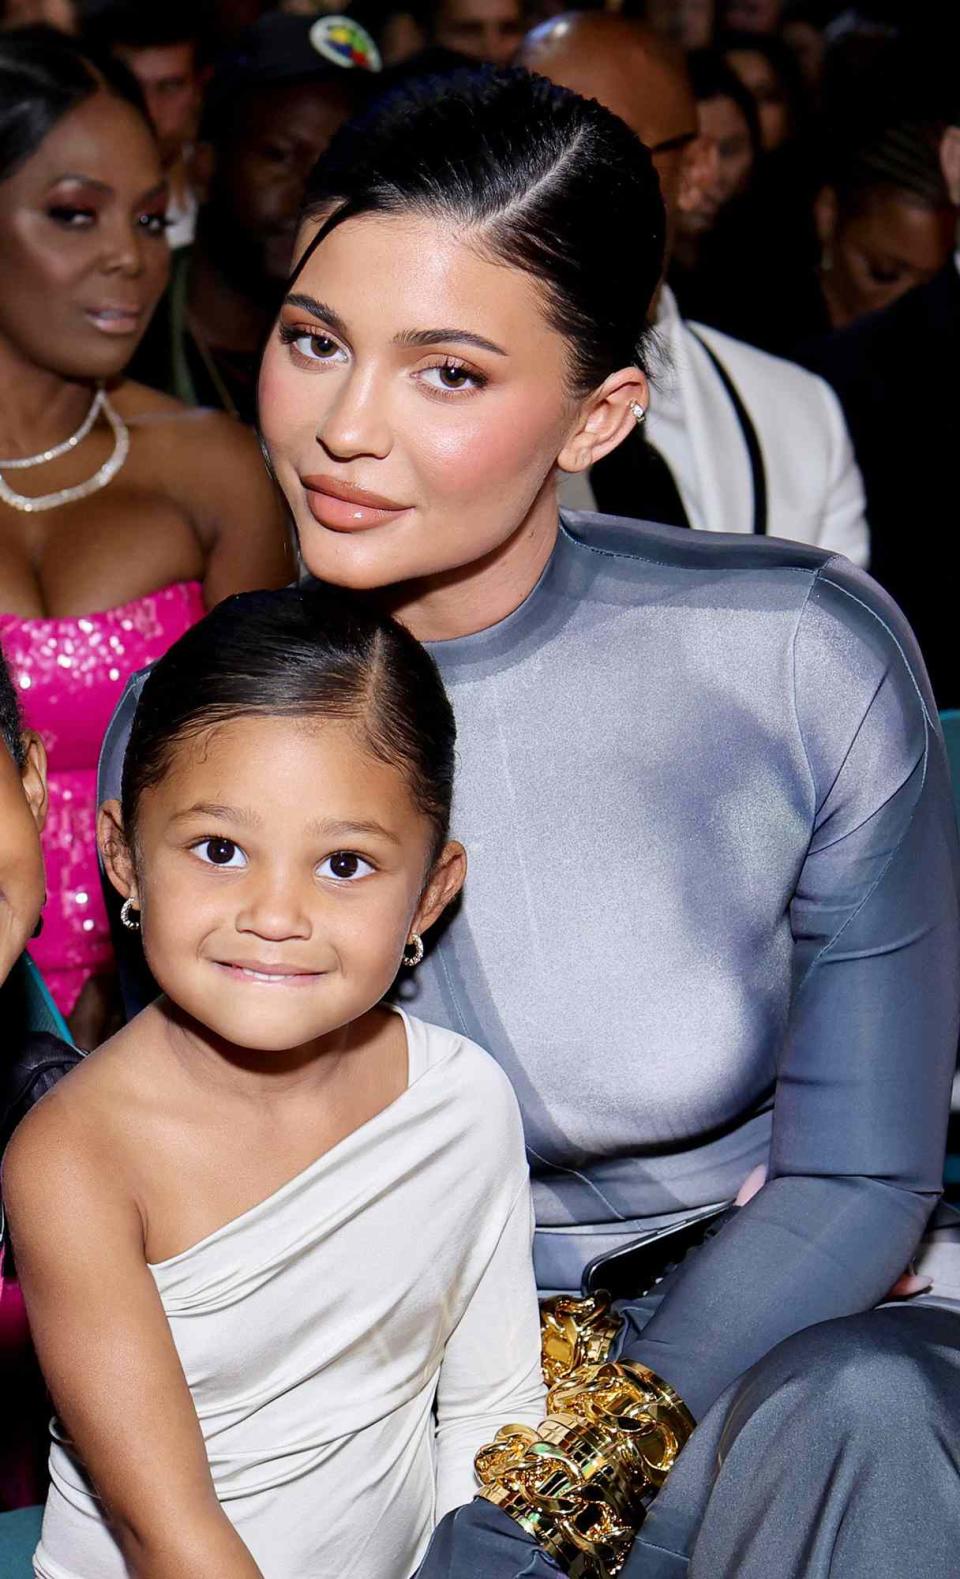 Stormi Webster and Kylie Jenner attend the 2022 Billboard Music Awards at MGM Grand Garden Arena on May 15, 2022 in Las Vegas, Nevada